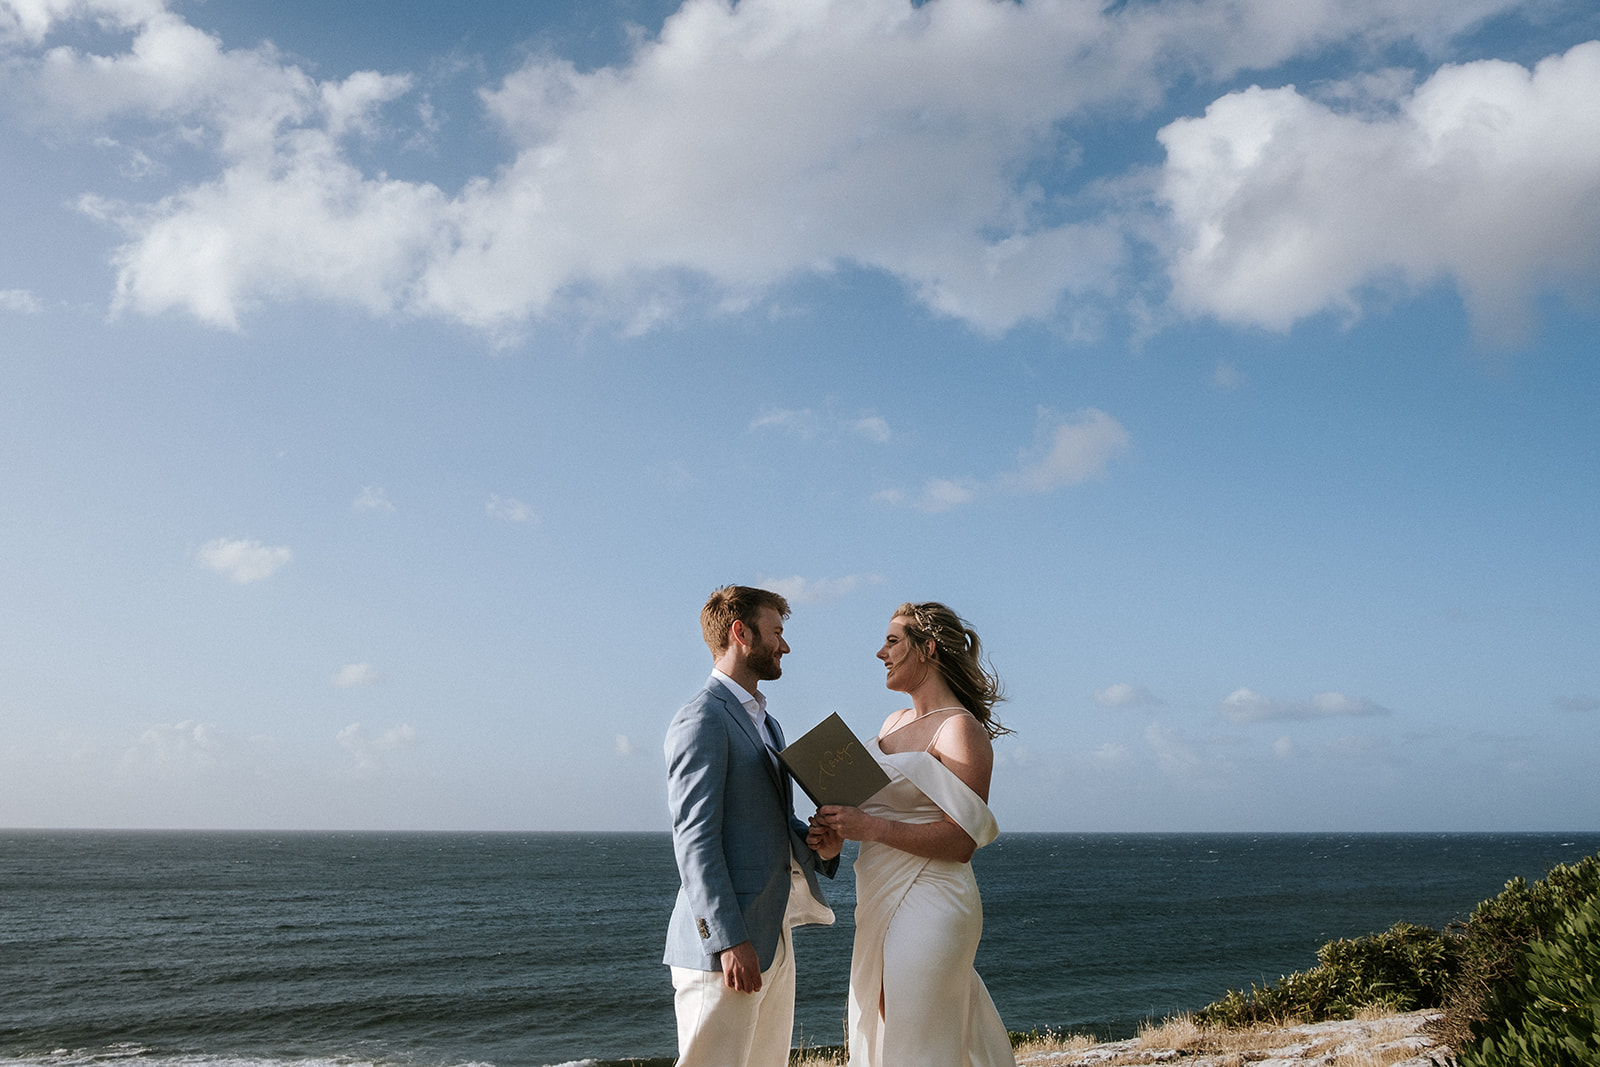 Katie and Josh exchanging the vows on a clifftop overlooking Stoked Bay during their elopement on Kangaroo Island